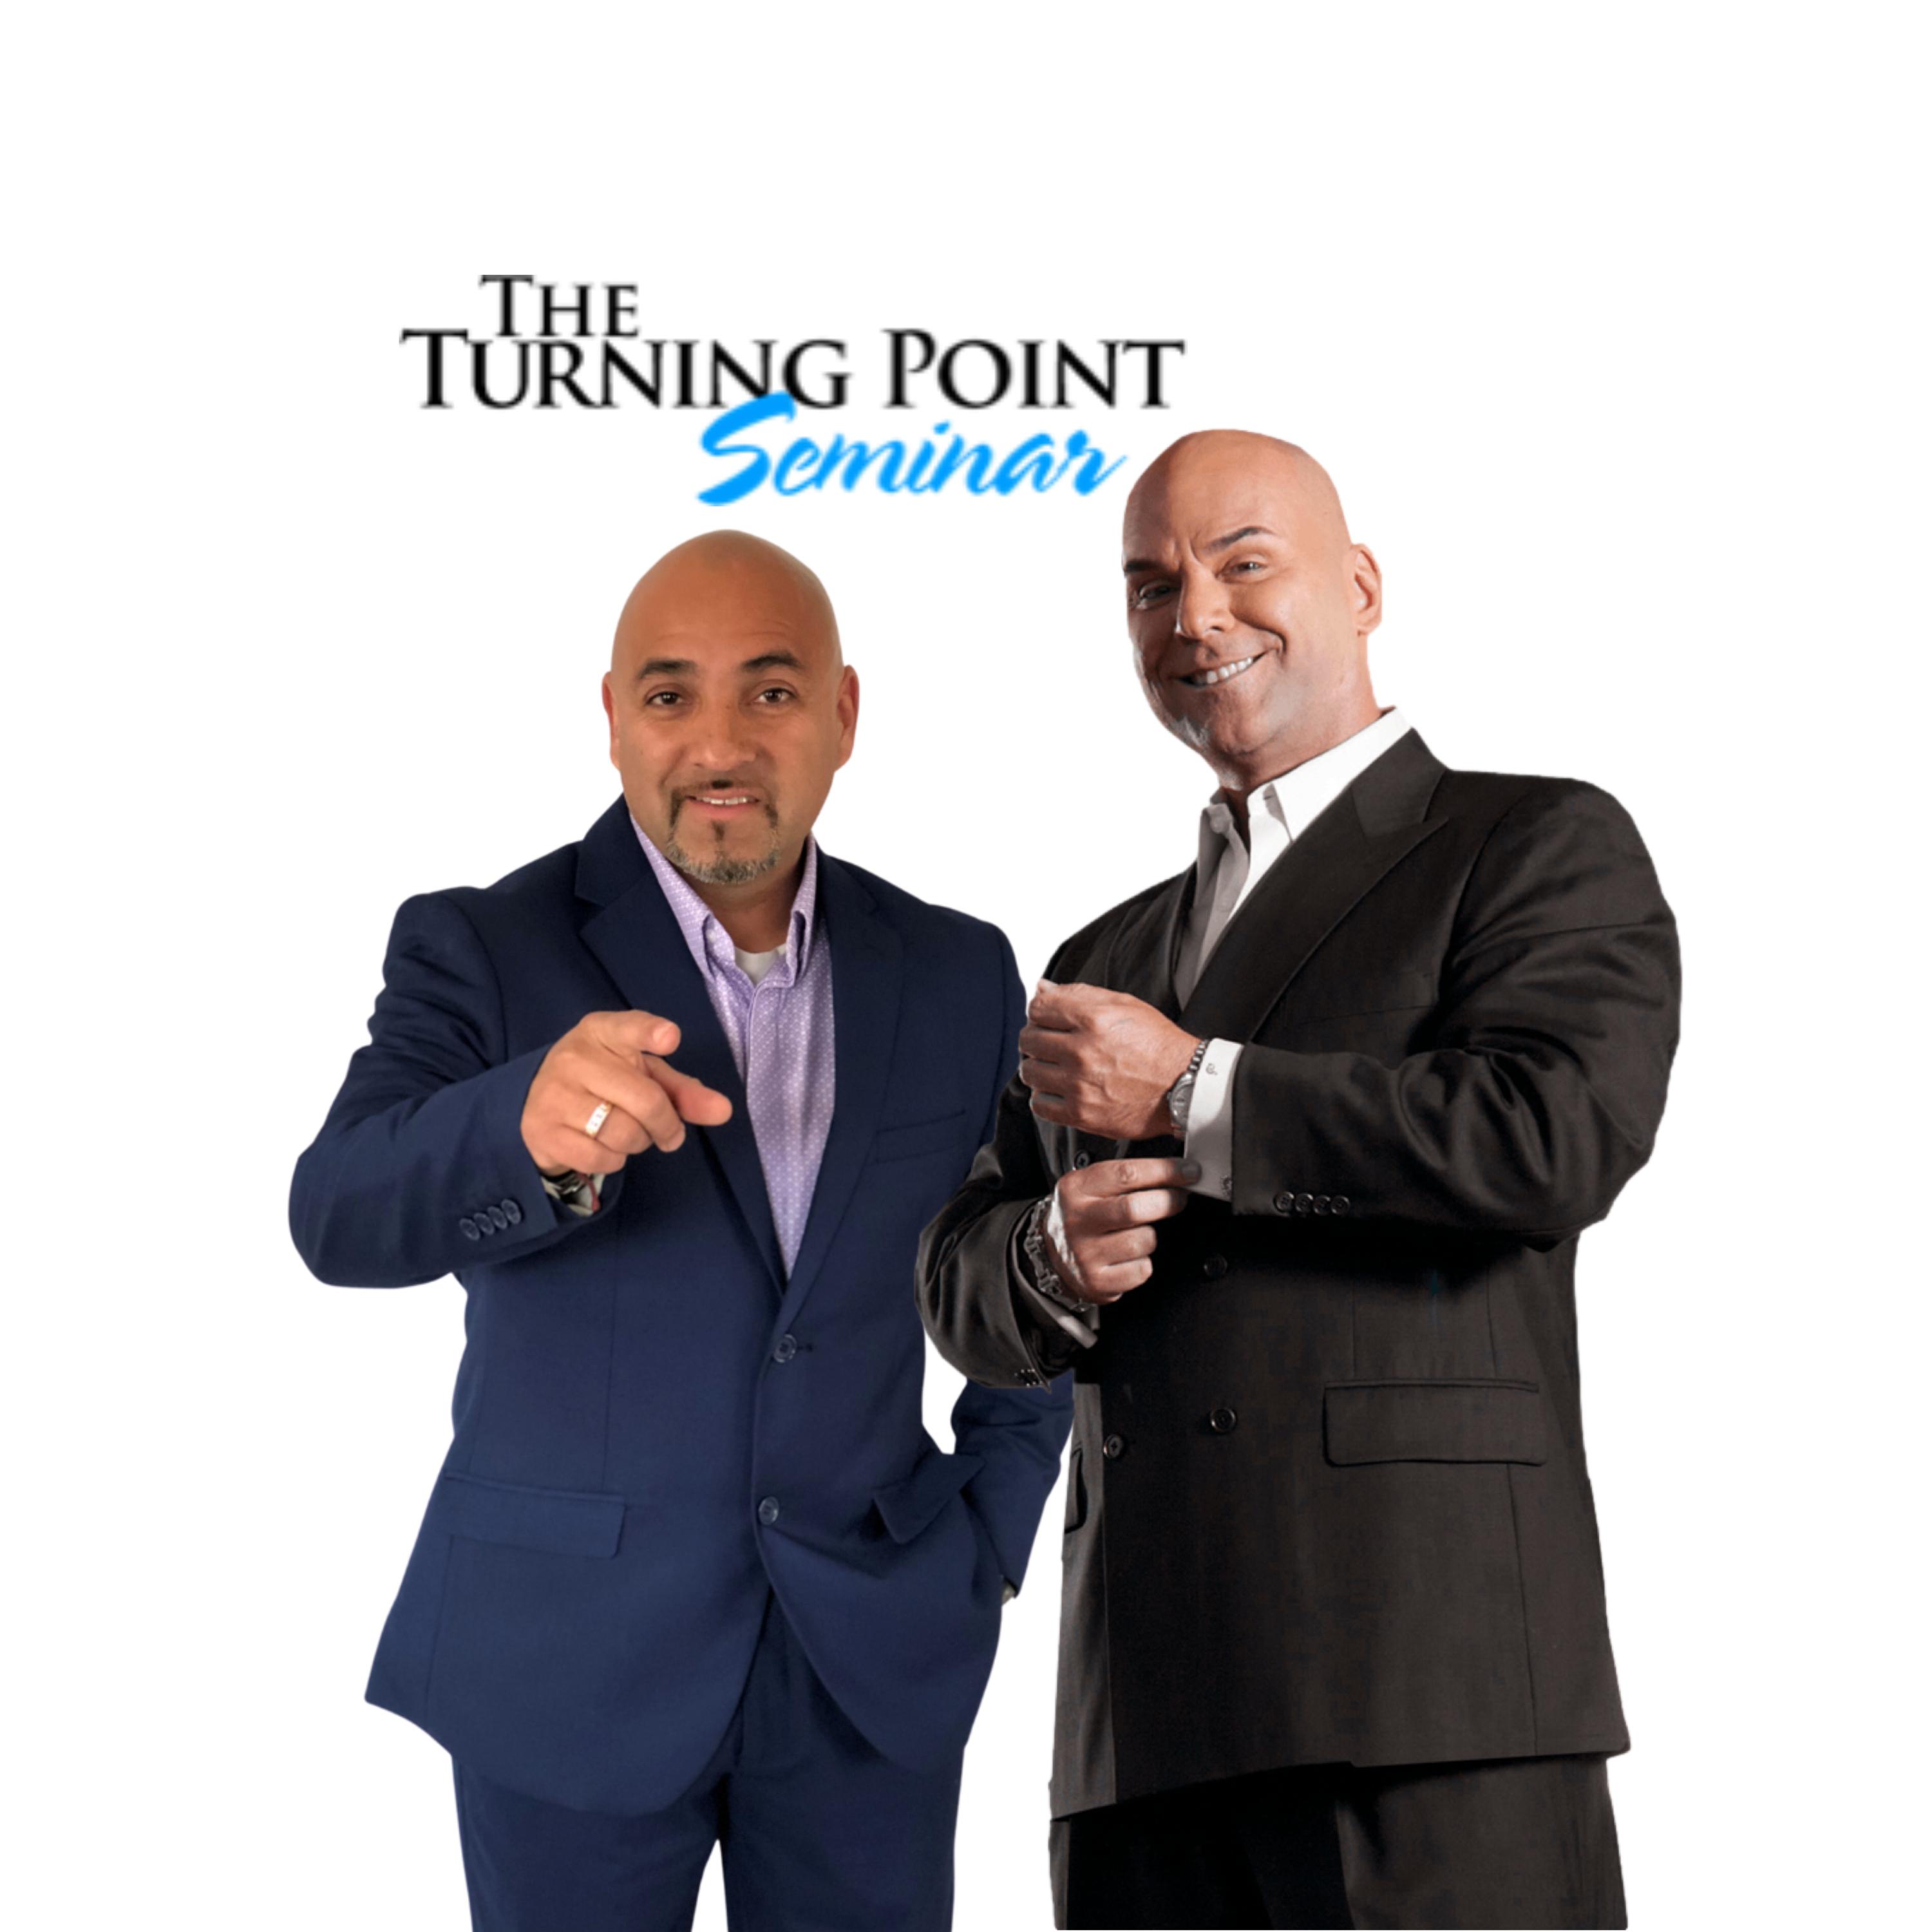 Cesar R. Espino extends an invitation to Experience Transformation at the Turning Point™ Seminar in Las Vegas